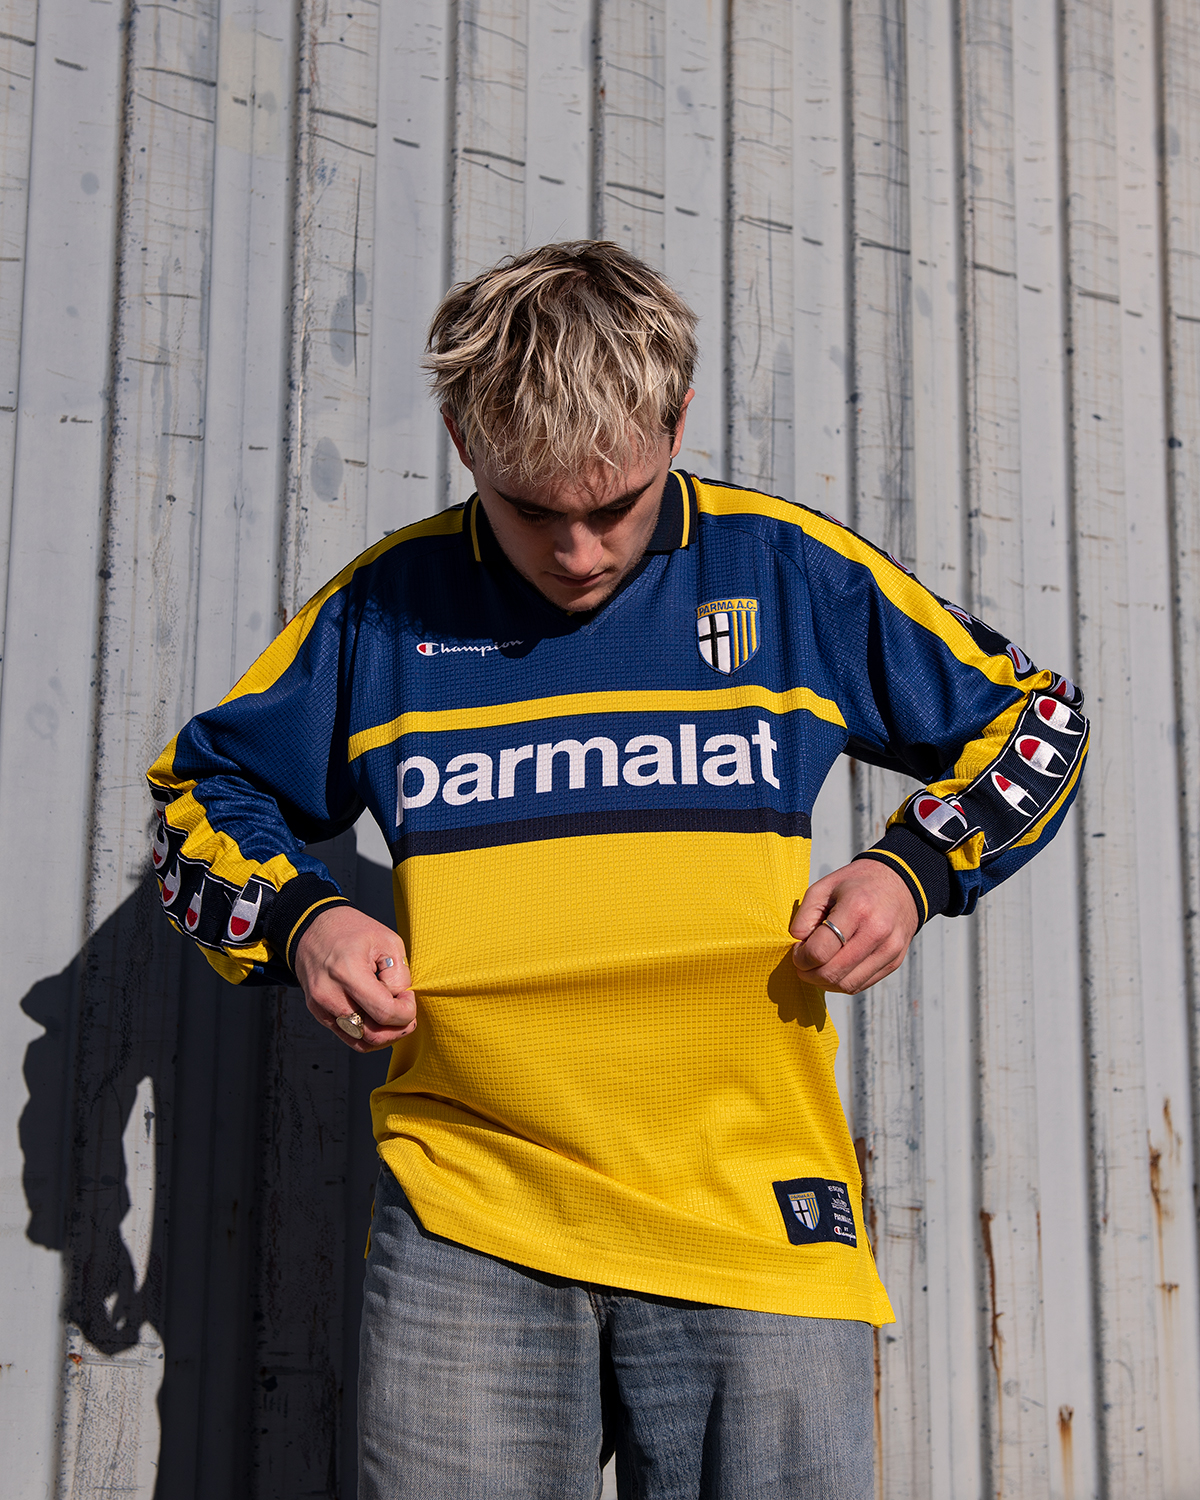 Classic Football Shirts on X: "Parma 1999 Long Sleeve Training Shirt 🔥 Parma. Champion. Parmalat. Long What could you want? Dropping on the site soon! https://t.co/QCXguTQOrb" / X